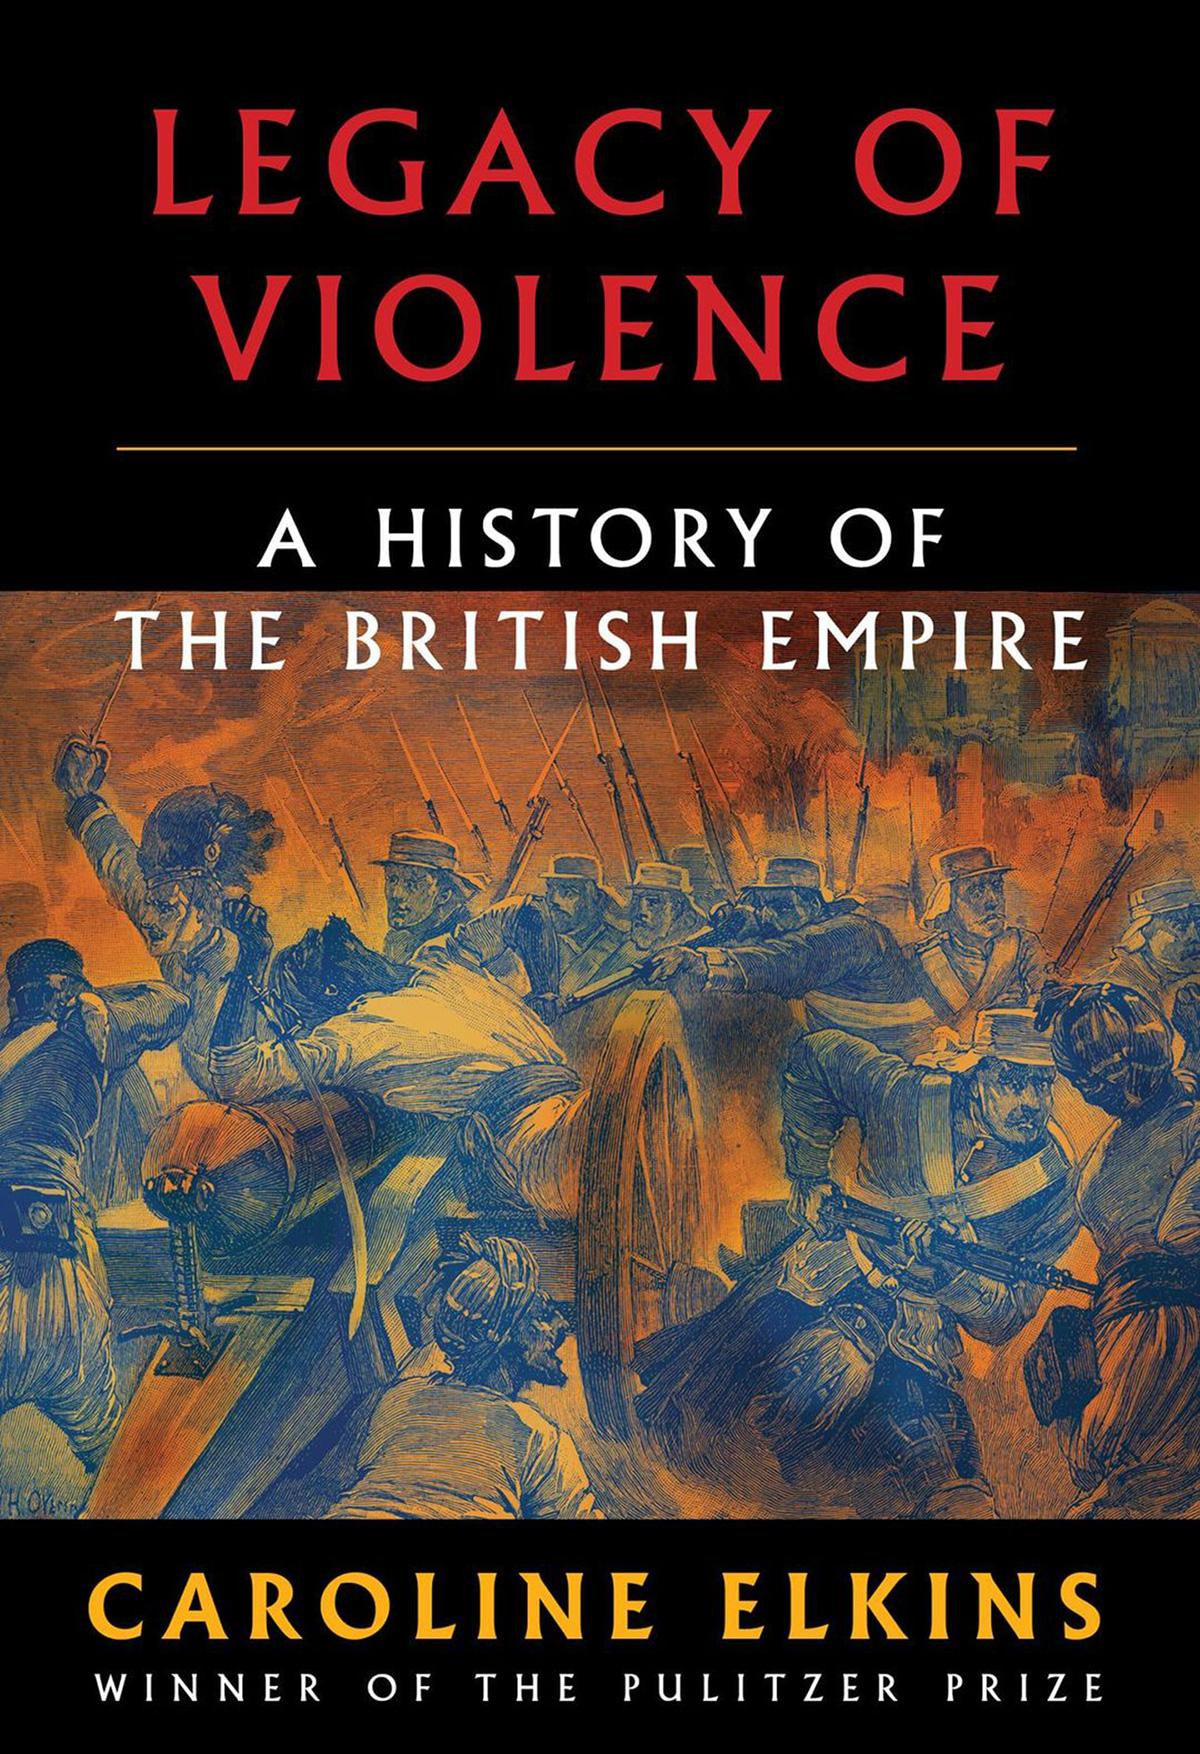 Legacy of Violence bookcover.